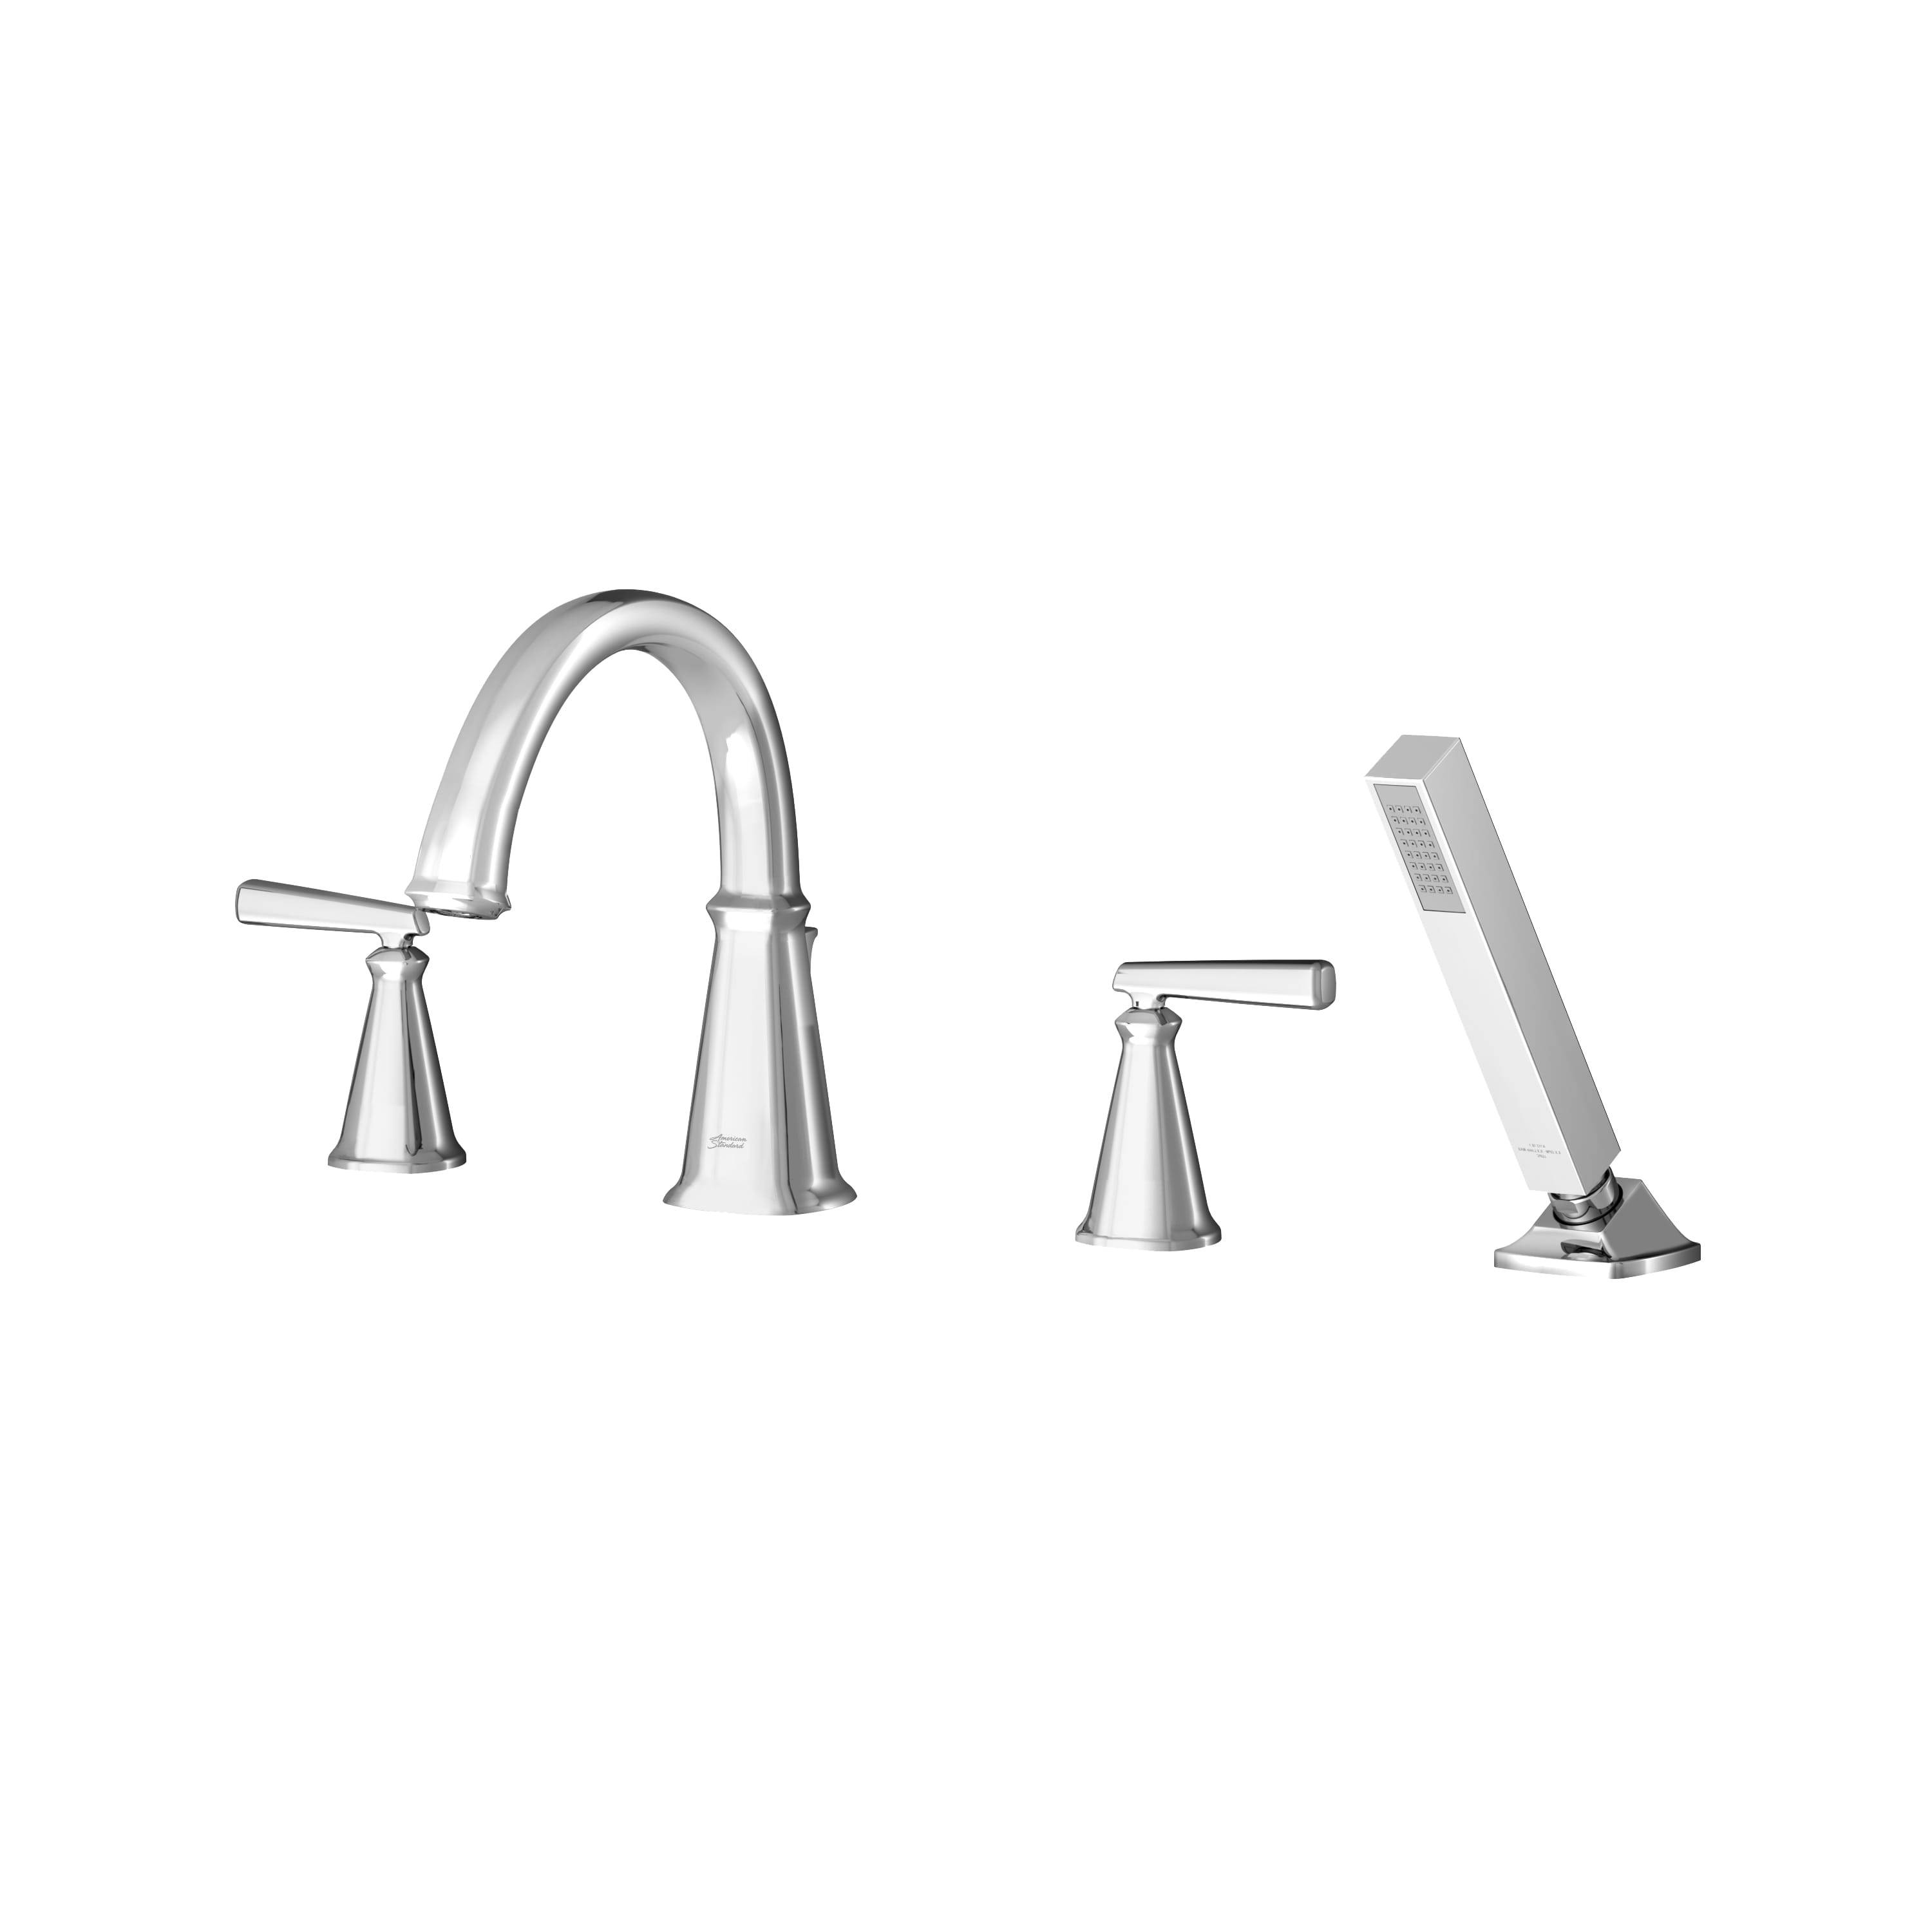 Edgemere Bathtub Faucet With Lever Handles and Personal Shower for Flash Rough In Valve CHROME